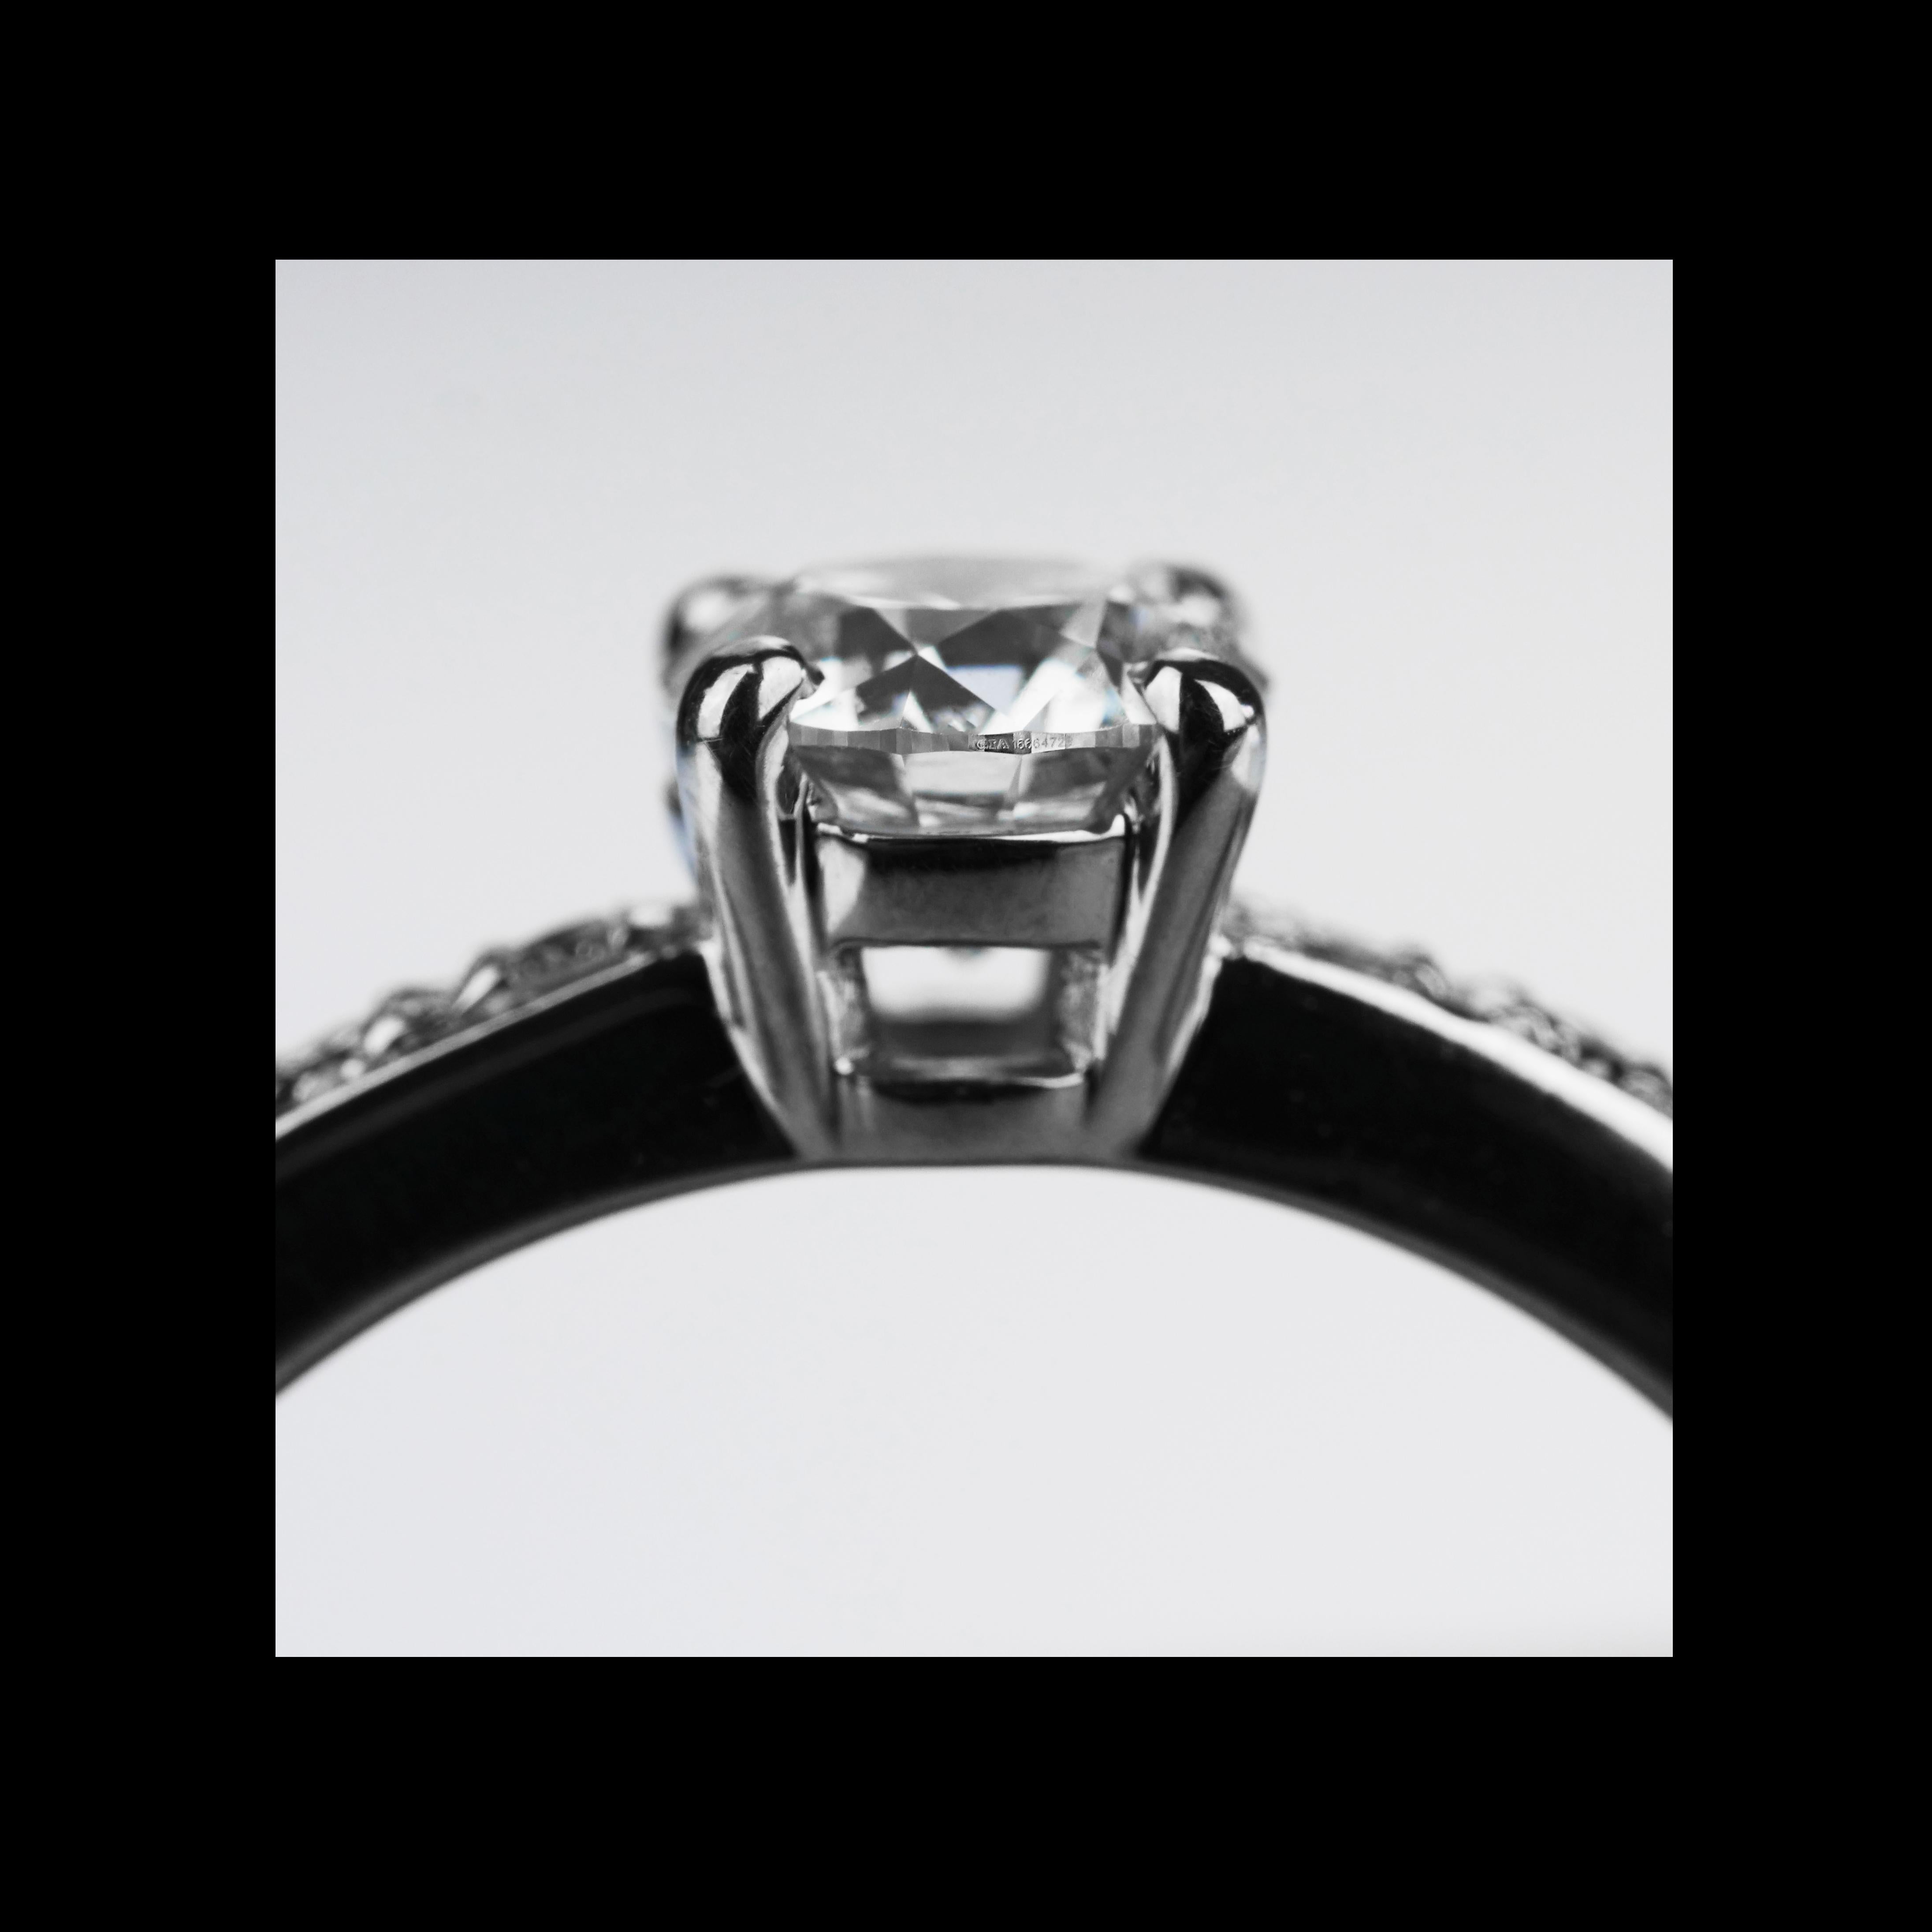 Bulgari Diamond Solitaire ring in Platinum, 0.50 ct D VS1, Griffe Collection For Sale 1